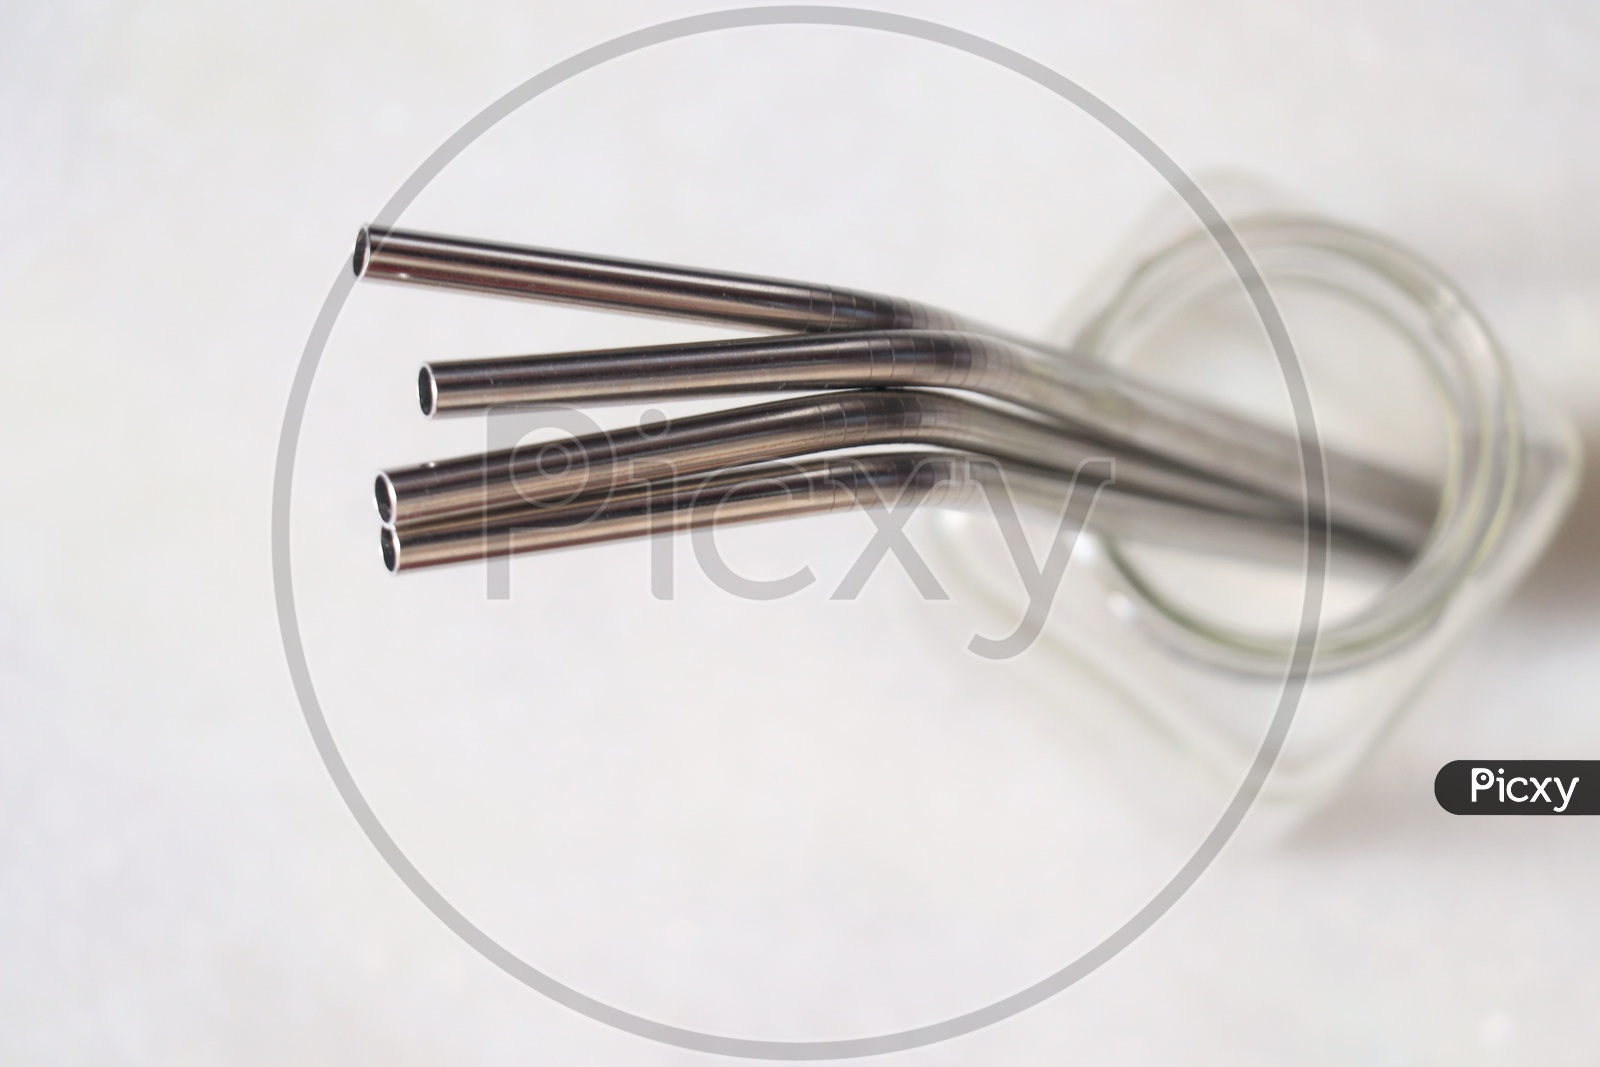 Stainless steel straws in a glass jar